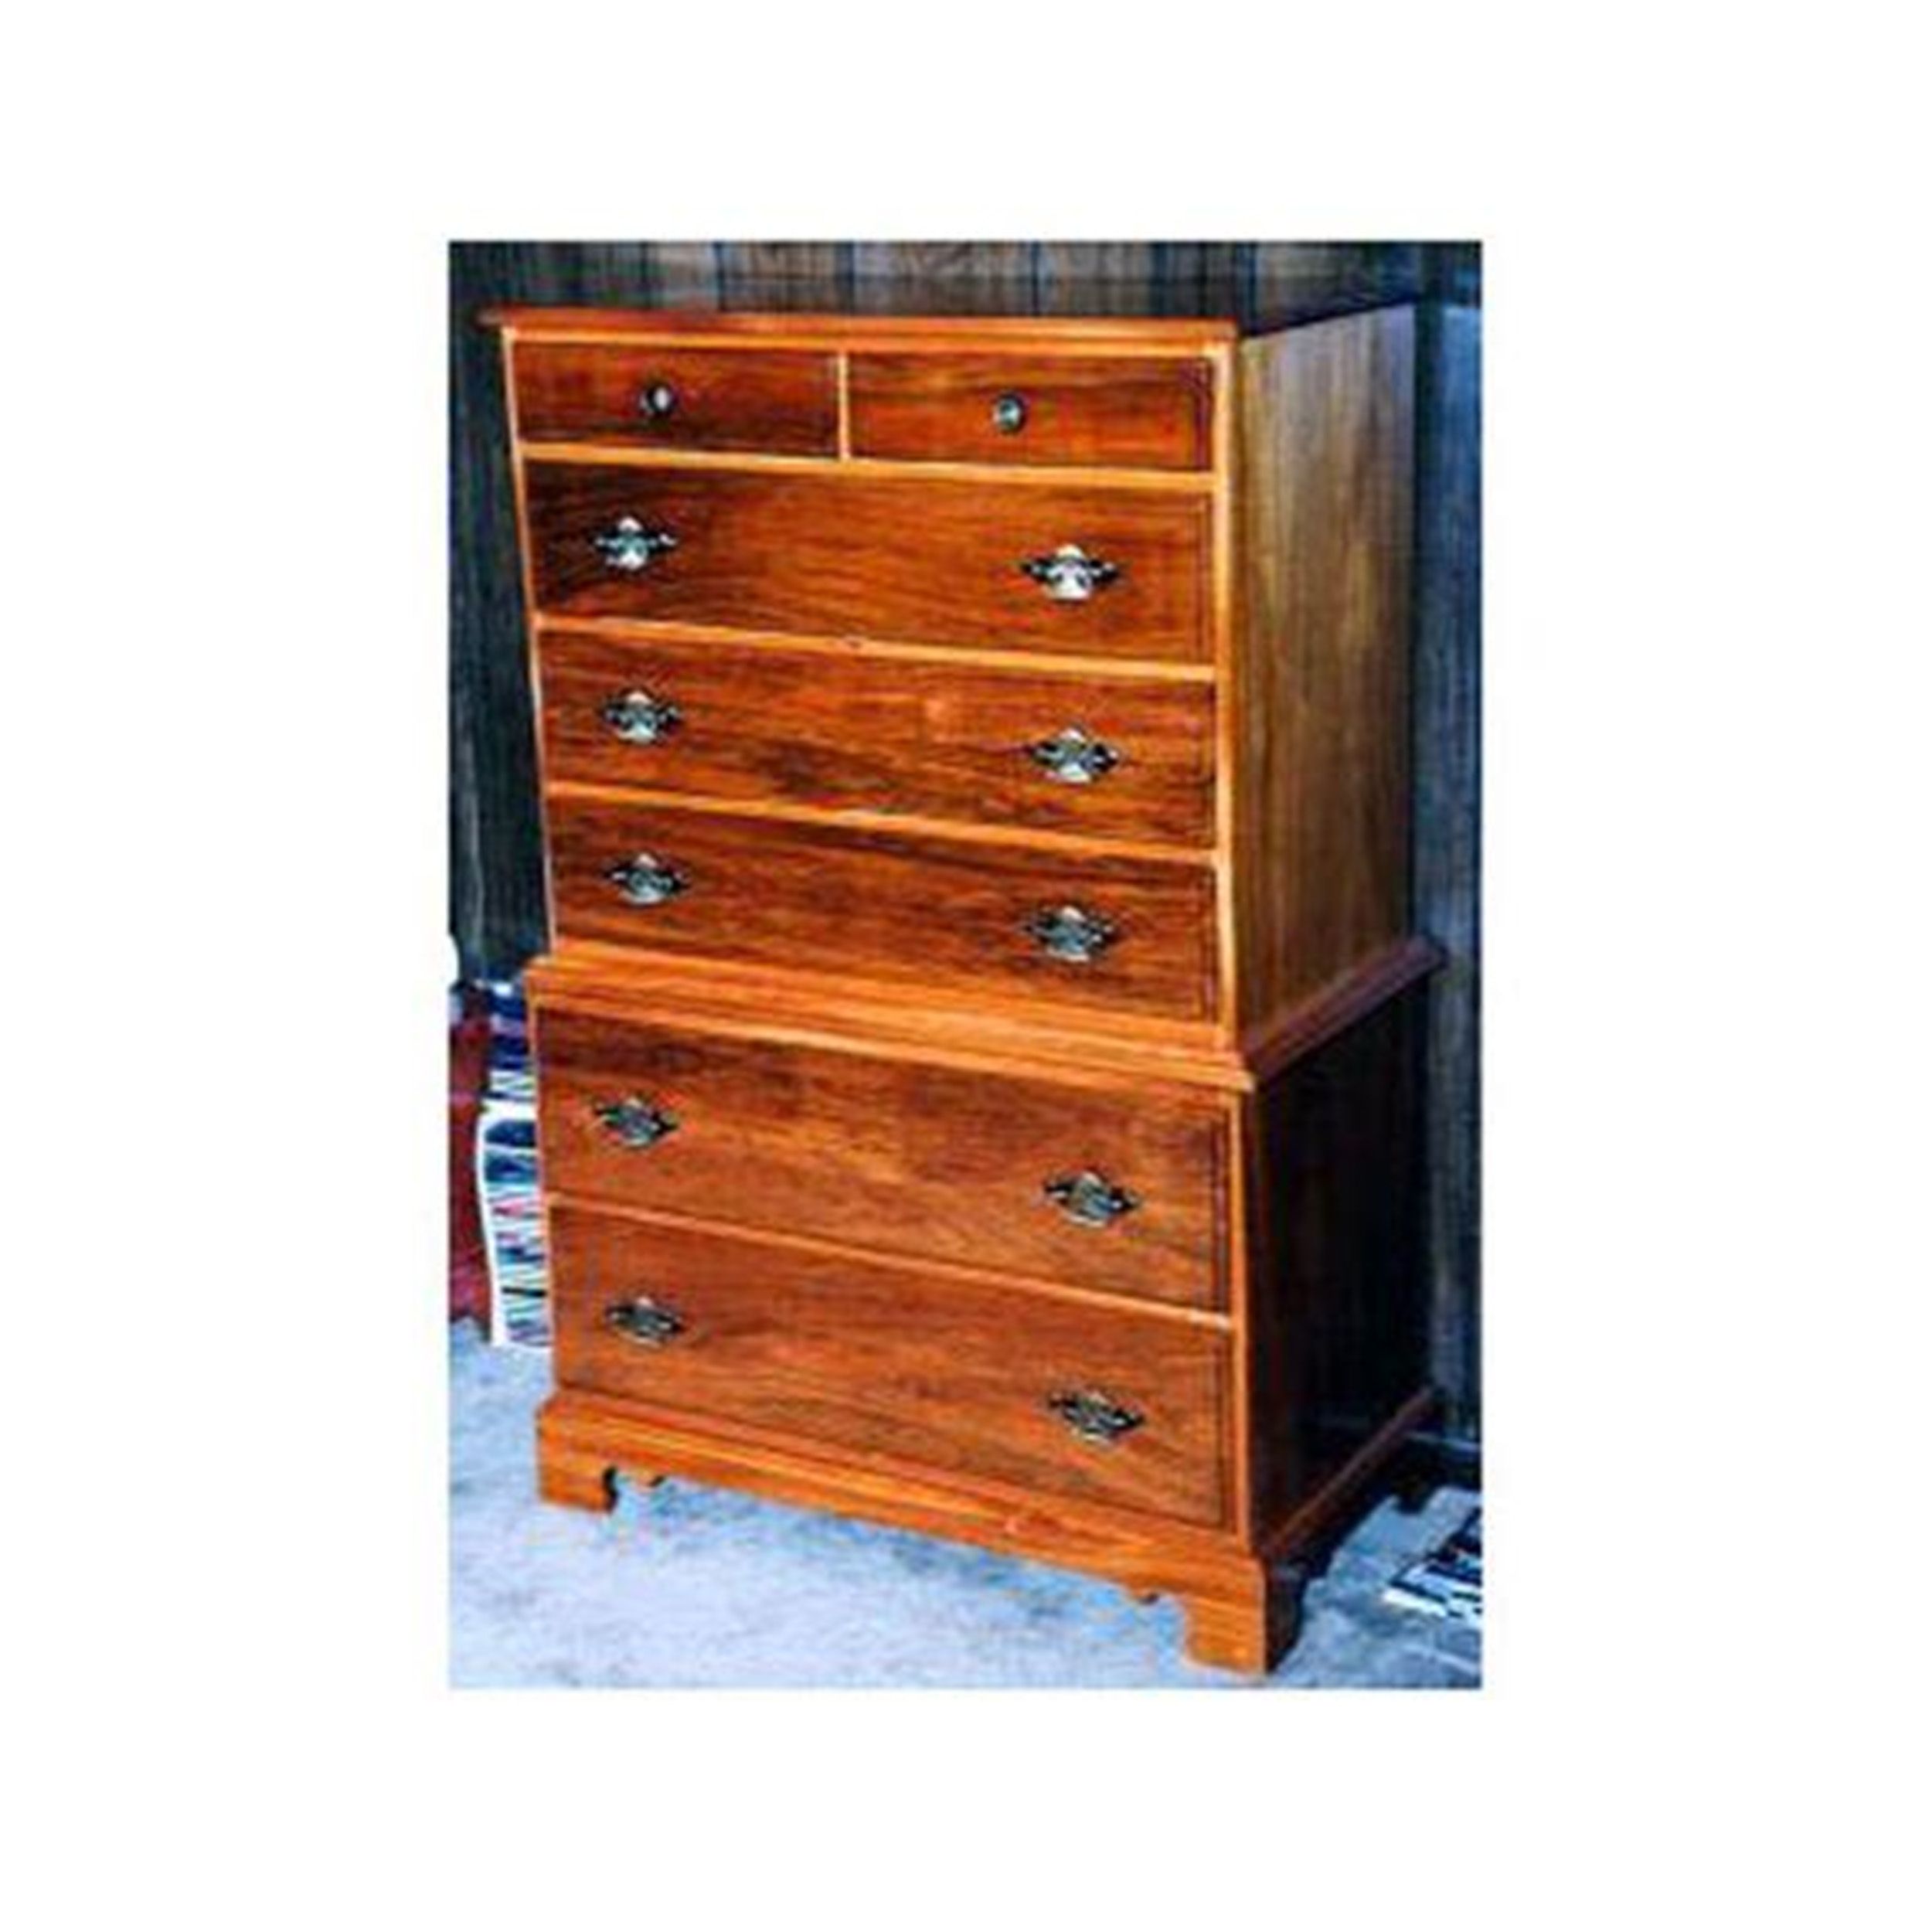 Woodworking Project Paper Plan To Build Chippendale Chest / Dresser